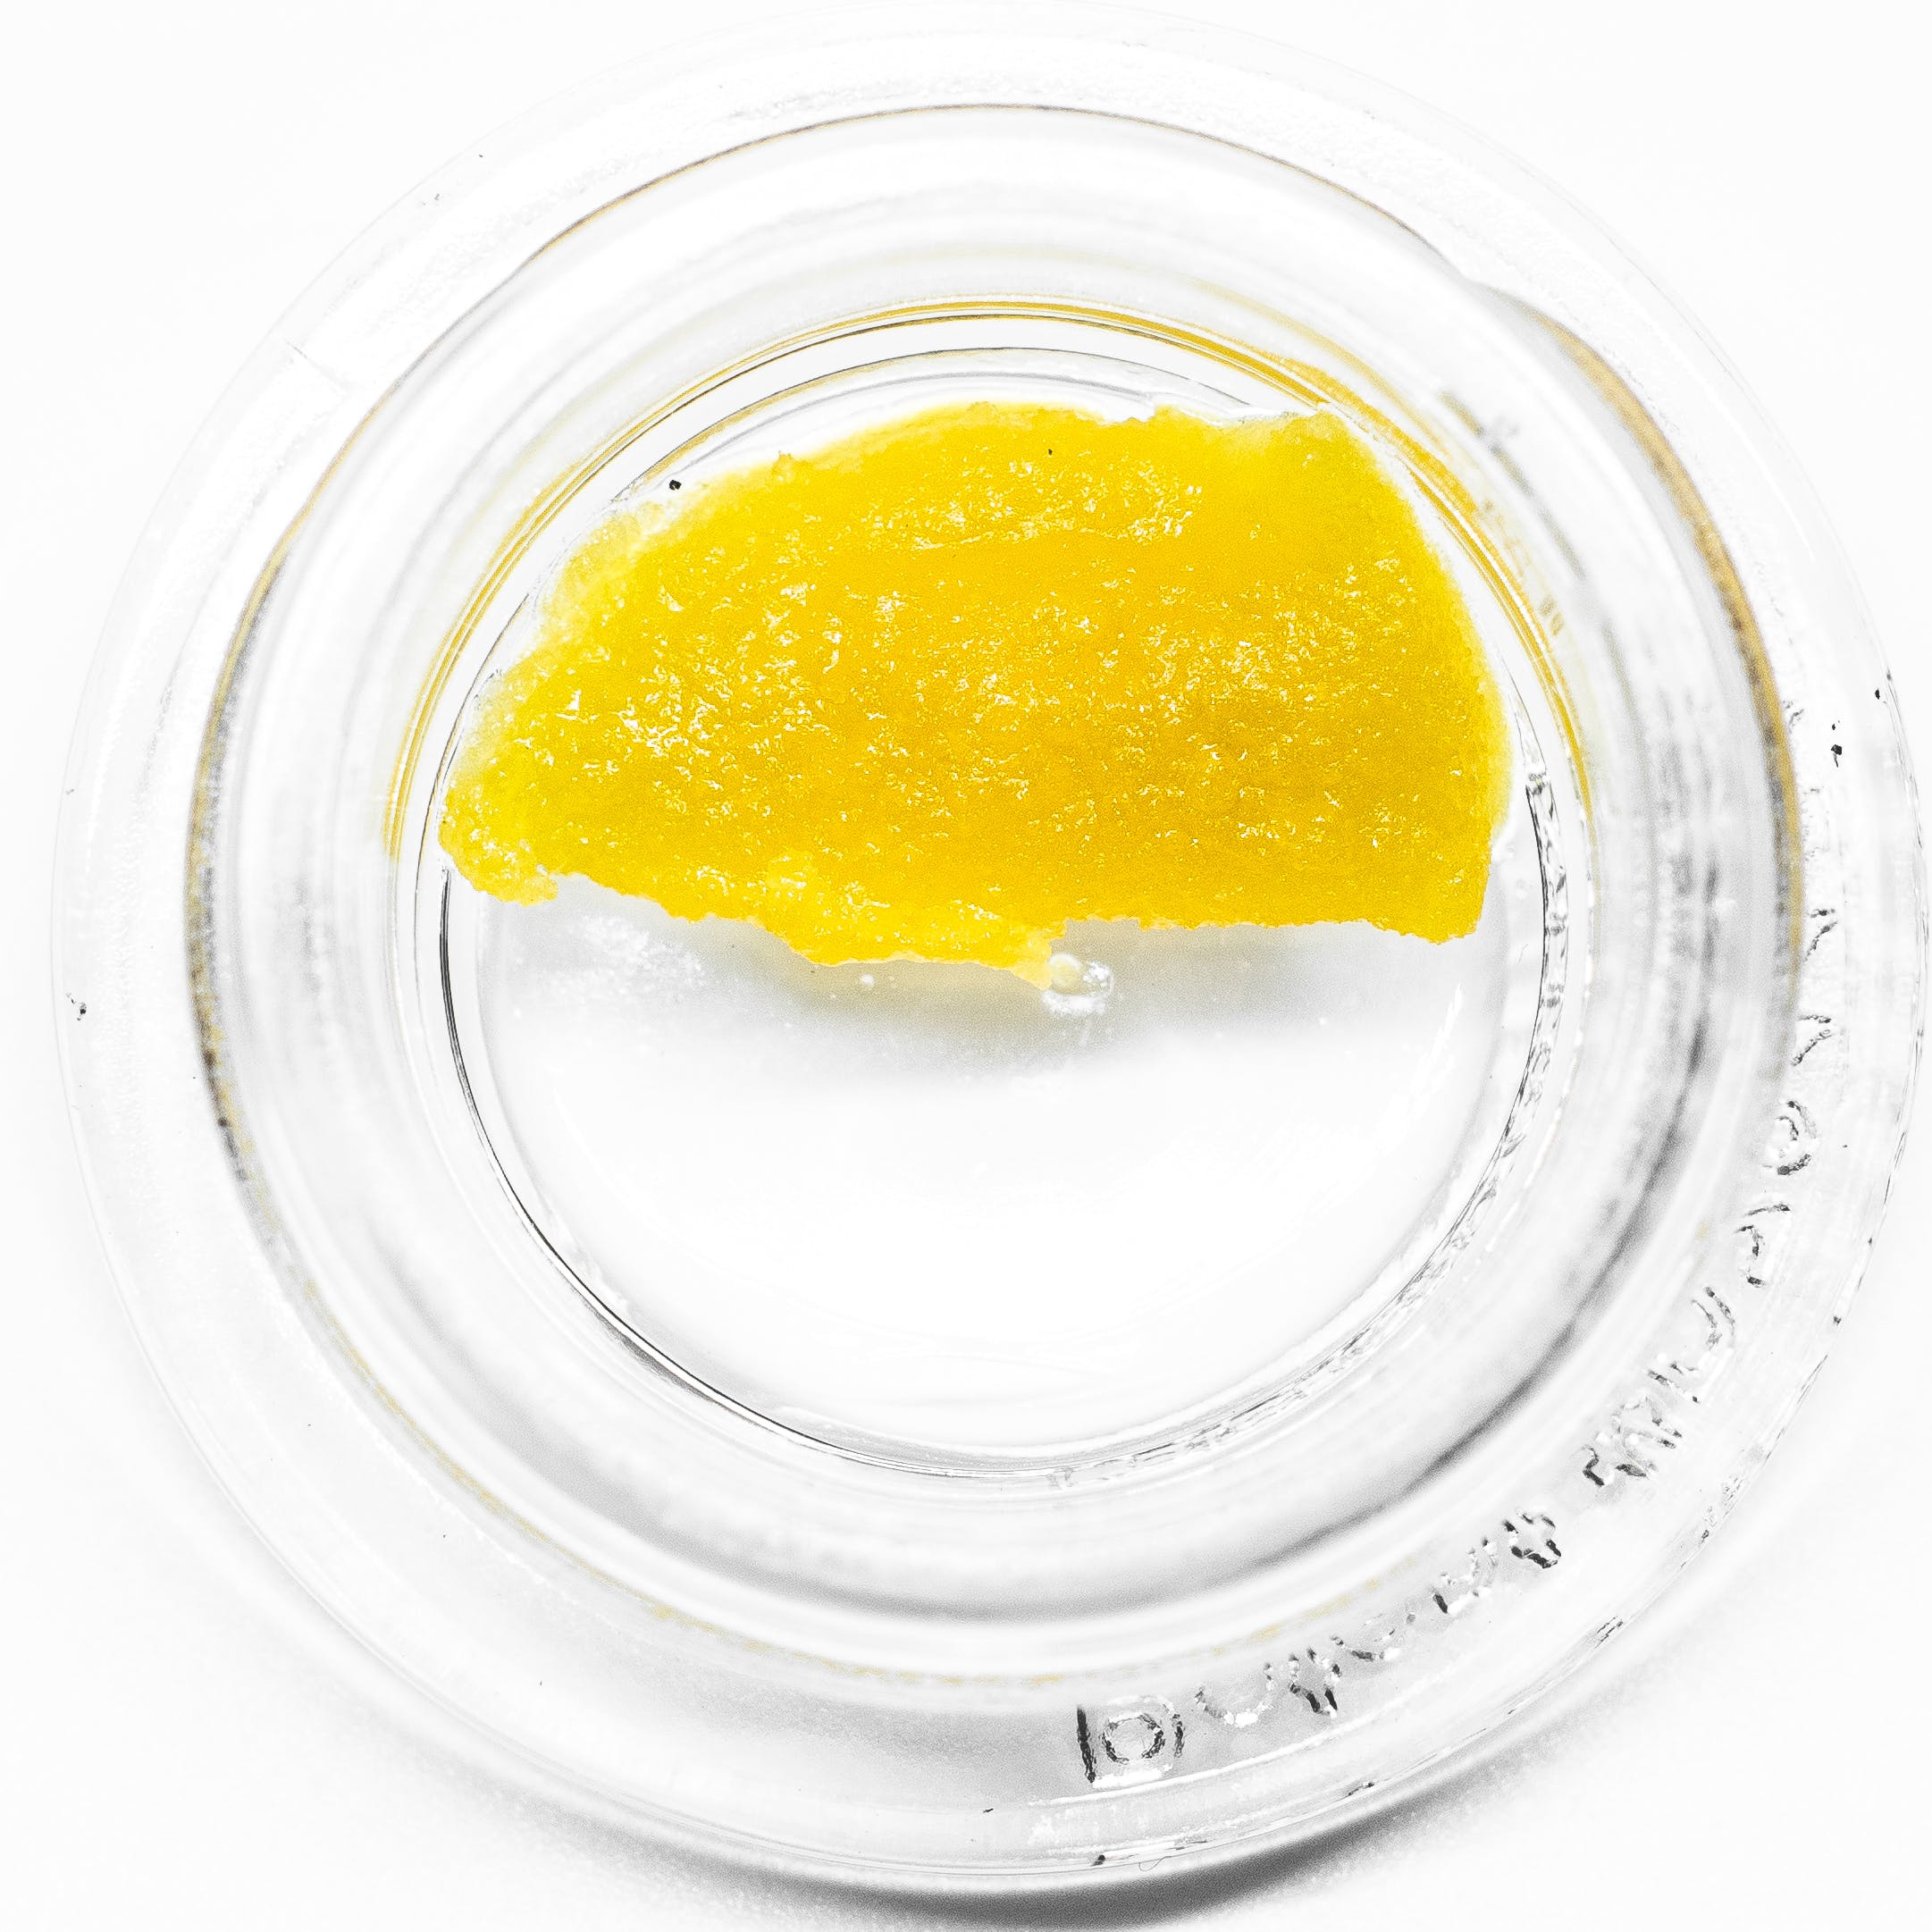 $45 SUMMIT Lucinda Williams Live Resin (S) 71.31% *BUY ONE, GET ONE 50% OFF*